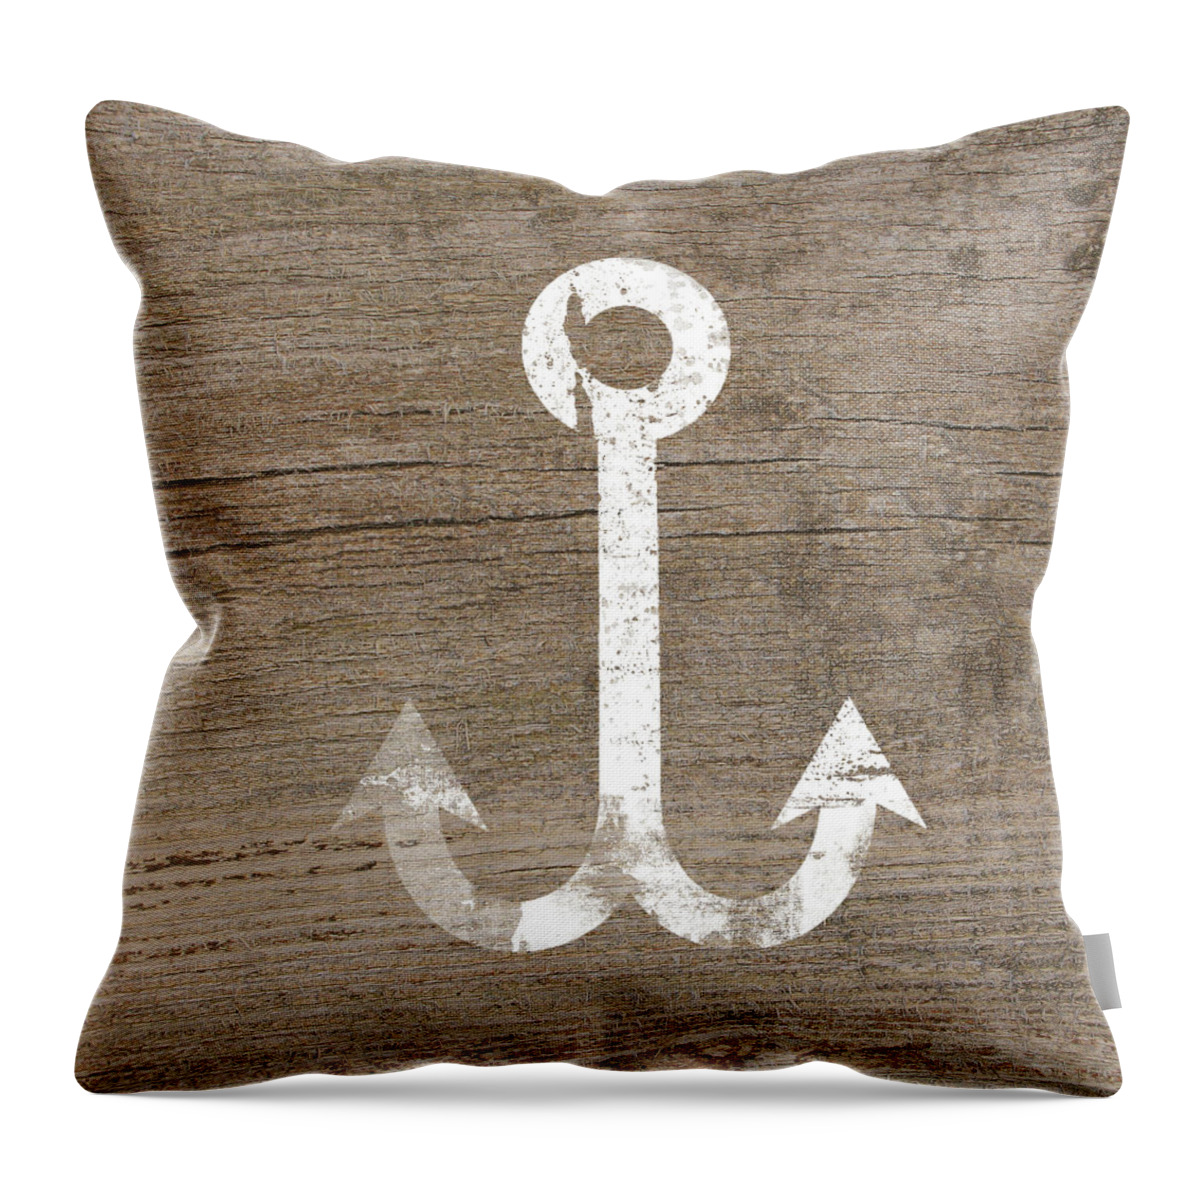 Wood Throw Pillow featuring the mixed media White and Wood Anchor- Art by Linda Woods by Linda Woods